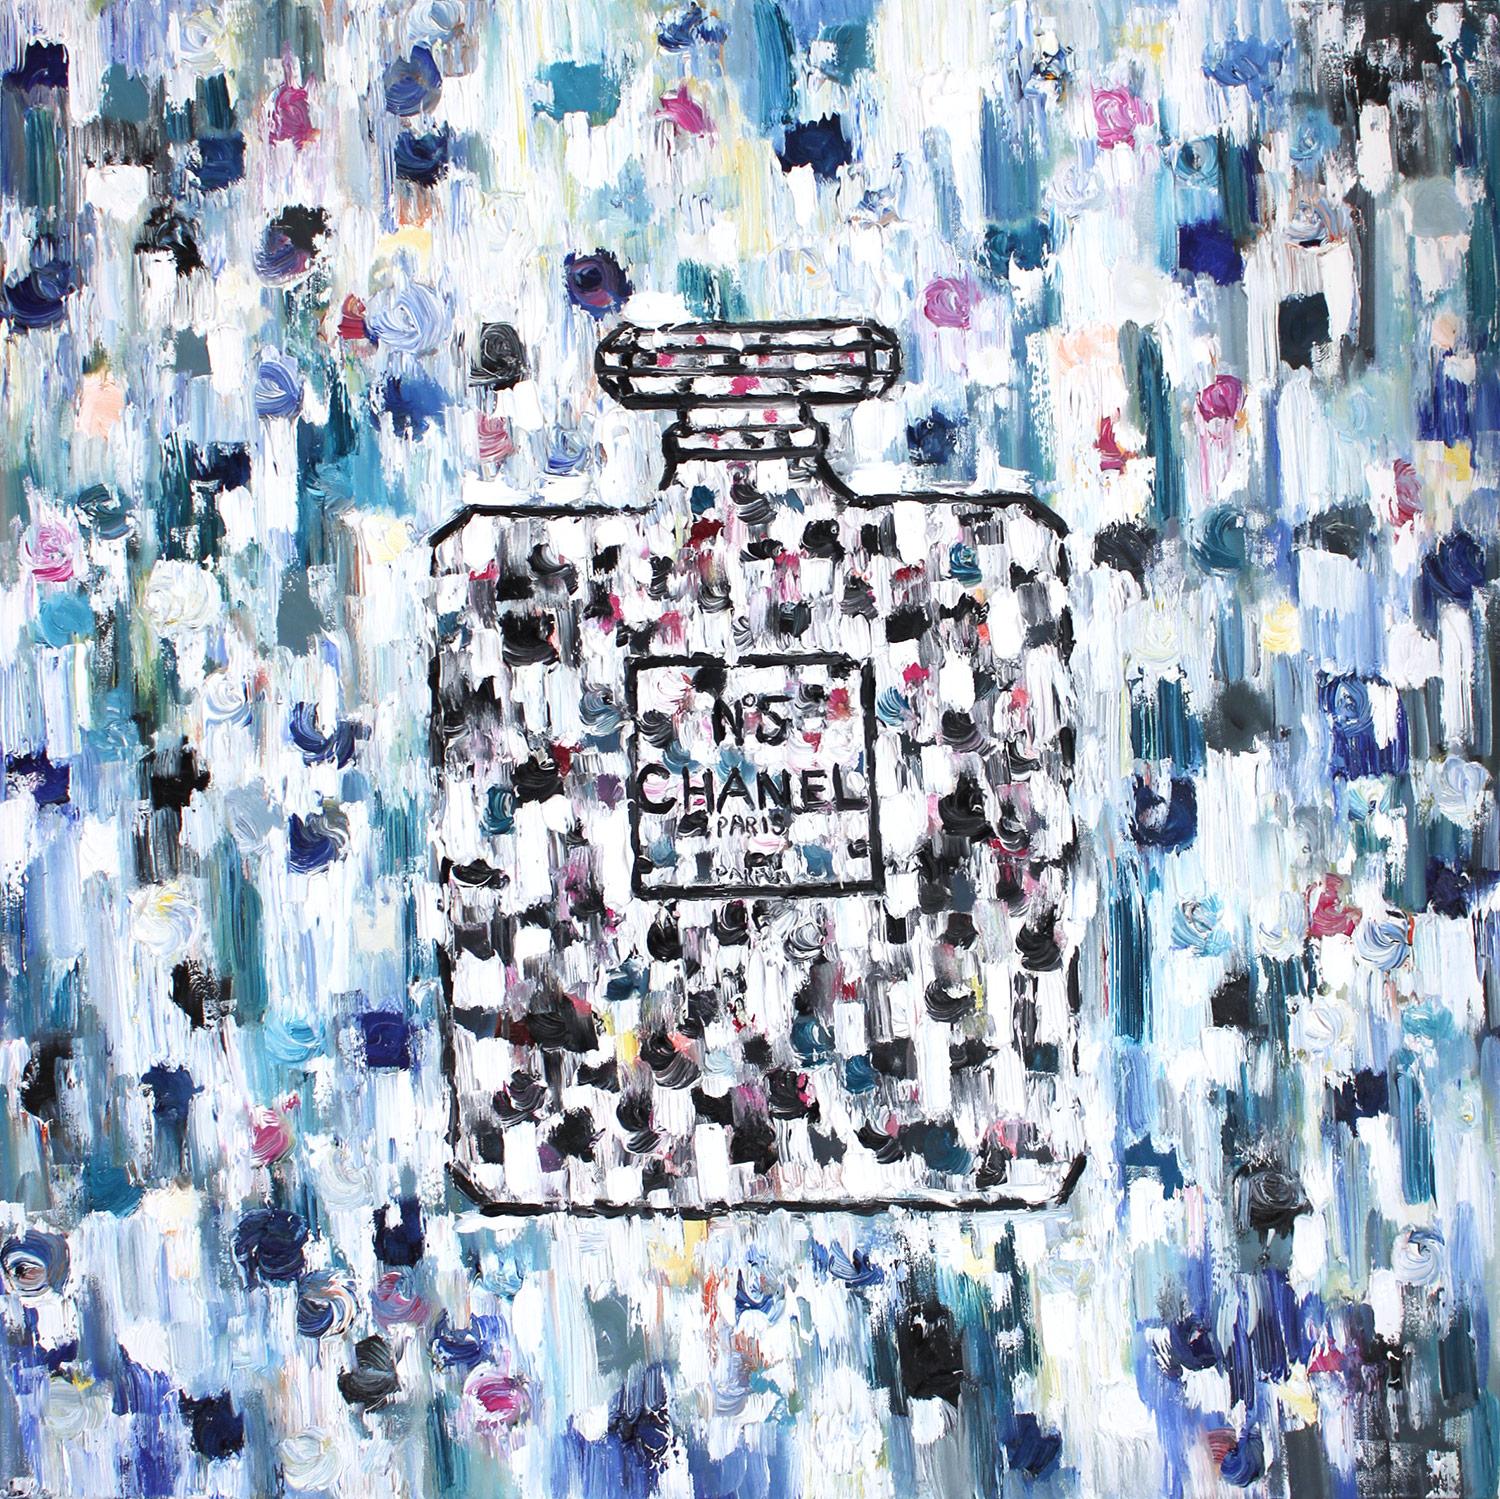 "Dripping Dots - Chanel in St. Tropez" Oil On Canvas Chanel Perfume Bottle